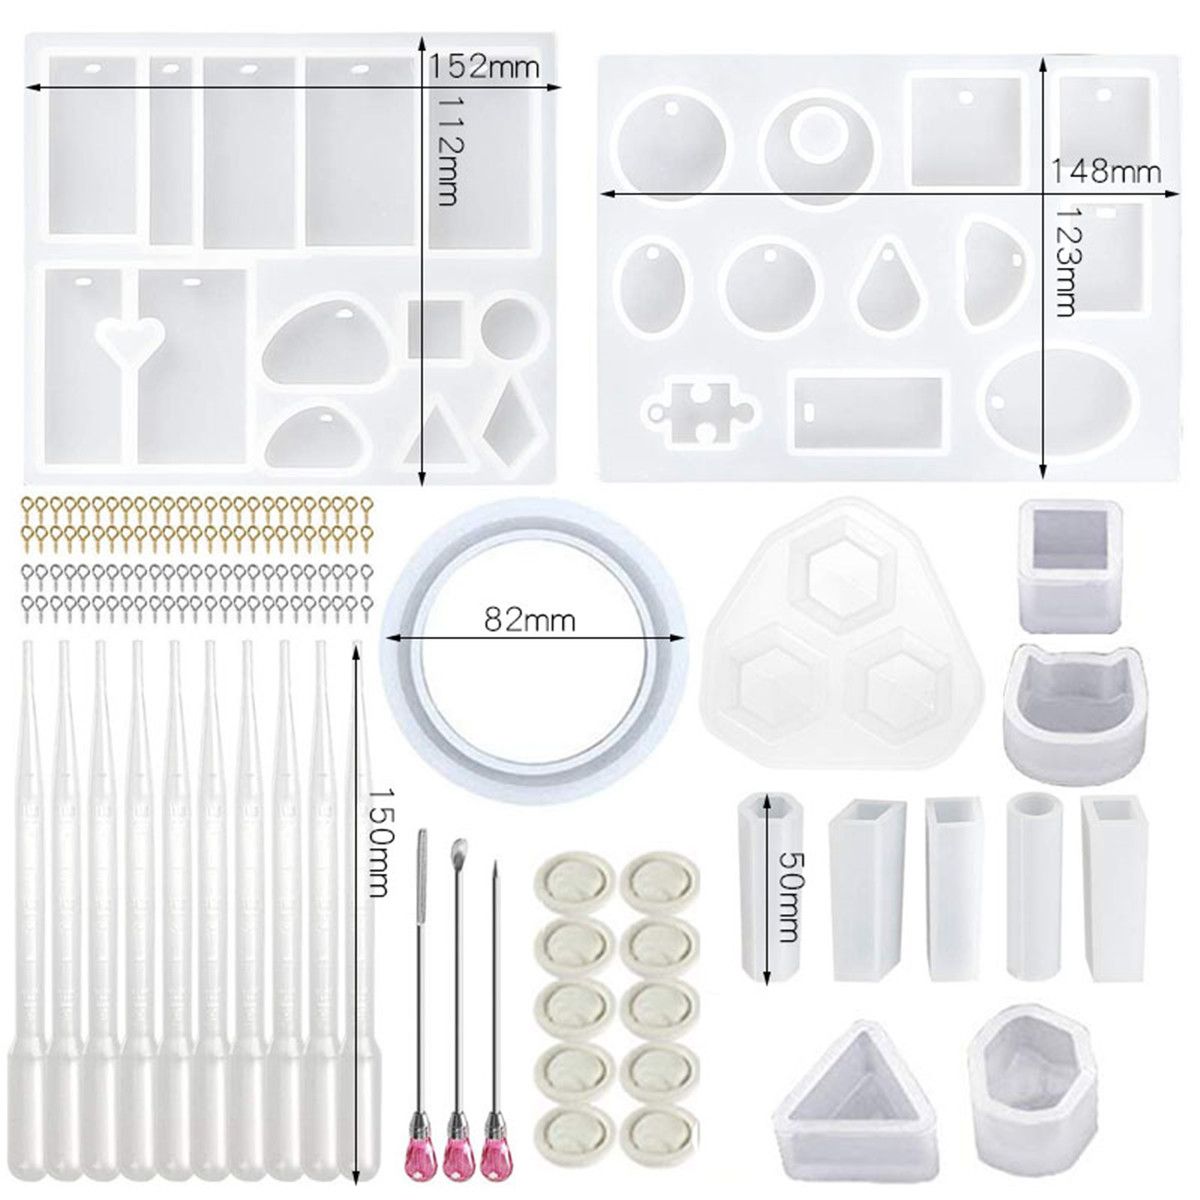 135PcsSet-Silicone-Resin-Casting-Mold-Epoxy-Set-Jewelry-Pendant-Mould-Tool-Craft-1603008